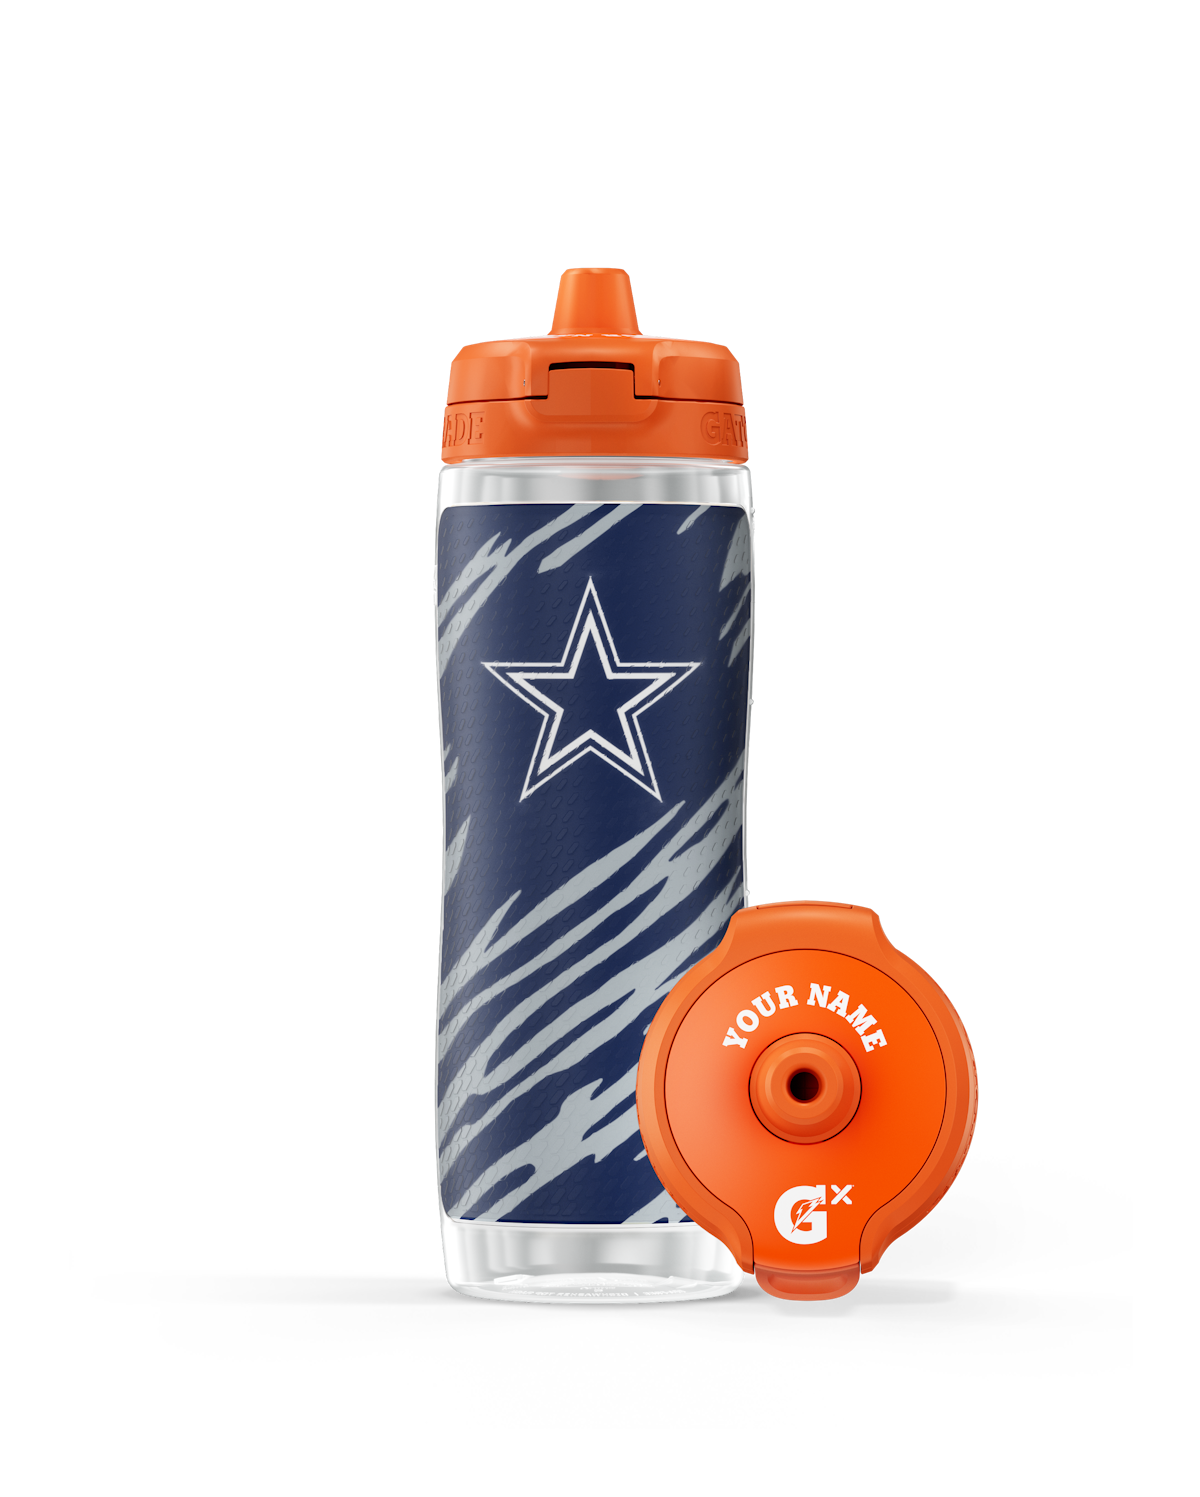 https://www.datocms-assets.com/101859/1696890639-00052000055894_nfl_new2023_bottles_dallascowbowys_producttile_2680x3344.png?auto=format&fit=fill&w=1200&ar=4%3A3&fill=solid